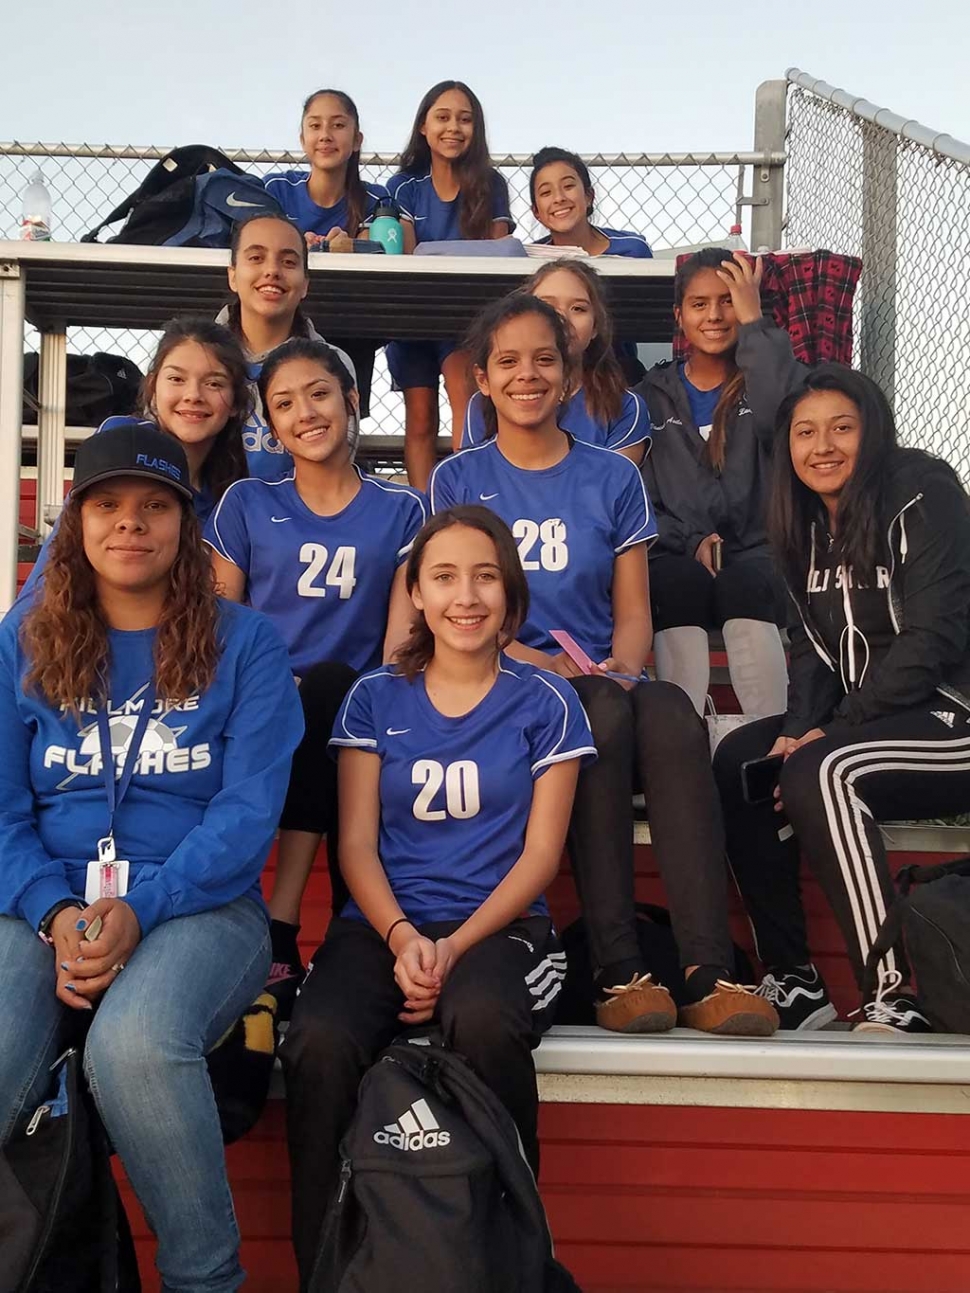 Pictured is the Fillmore High School Girls Frosh Soccer Team huddled together after a tough lose to Carpinteria this past week. Nicole Gonzales scored the lone goal. Lady Flashes had 15 shots on goal. Goal Keeper Nely Lara had 7 saves. Photo courtesy Coach Omero Martinez.